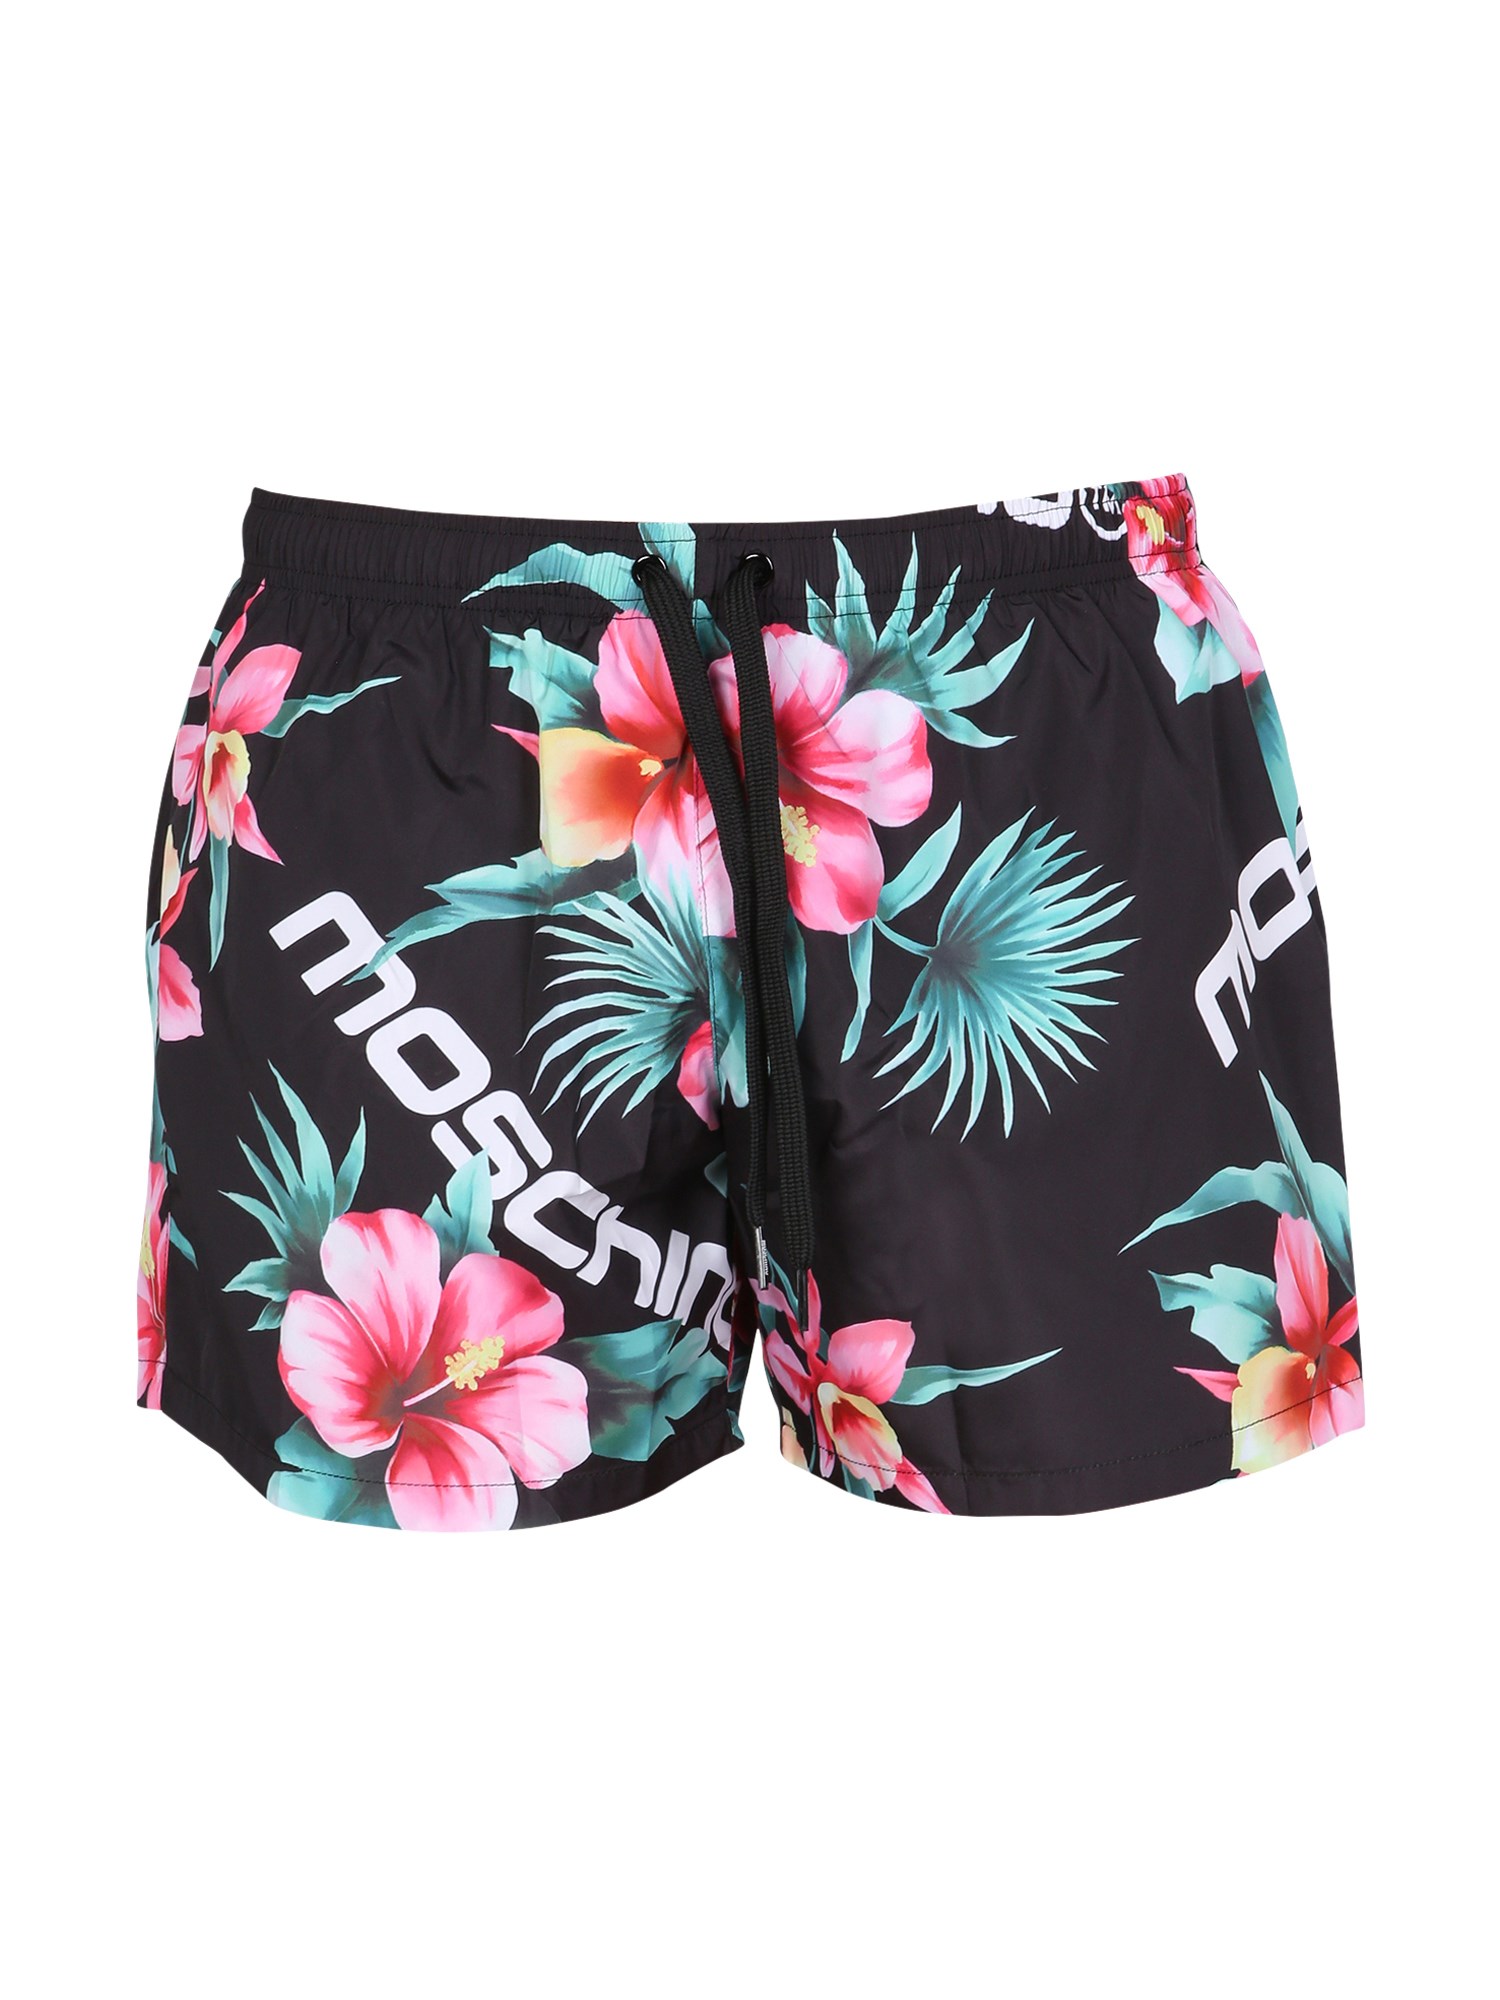 moschino swimsuit with floral pattern